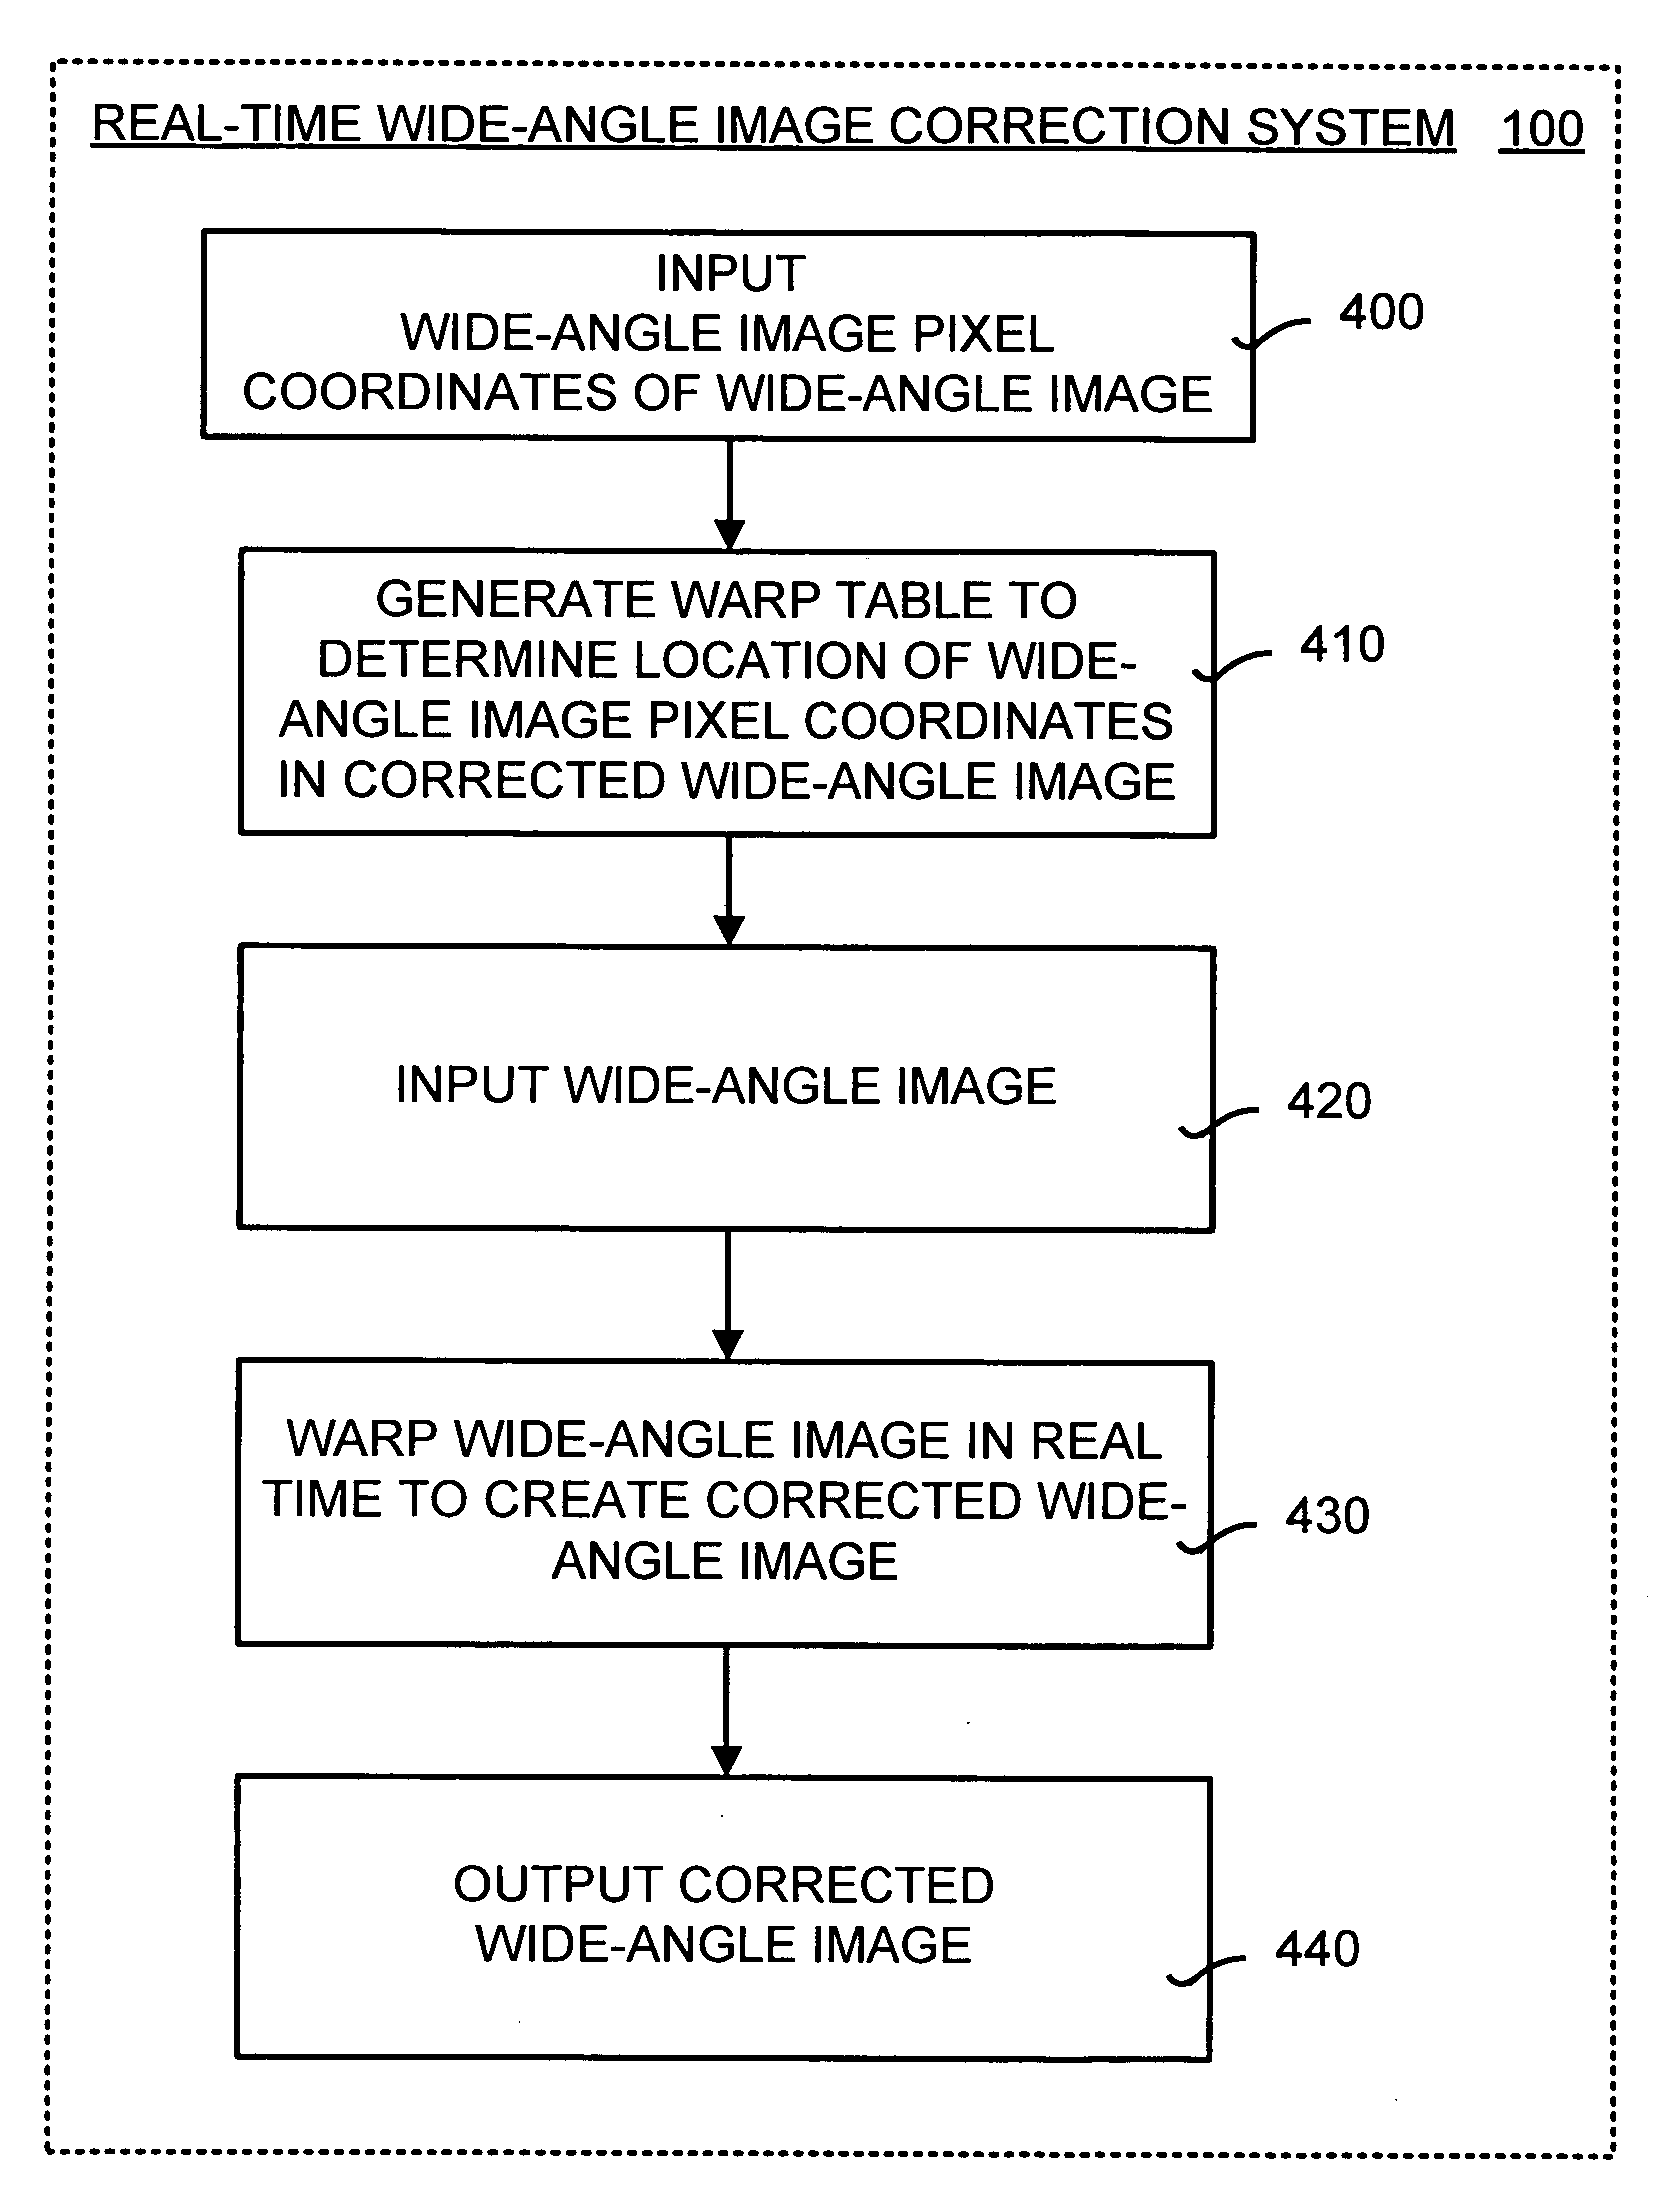 Real-time wide-angle image correction system and method for computer image viewing